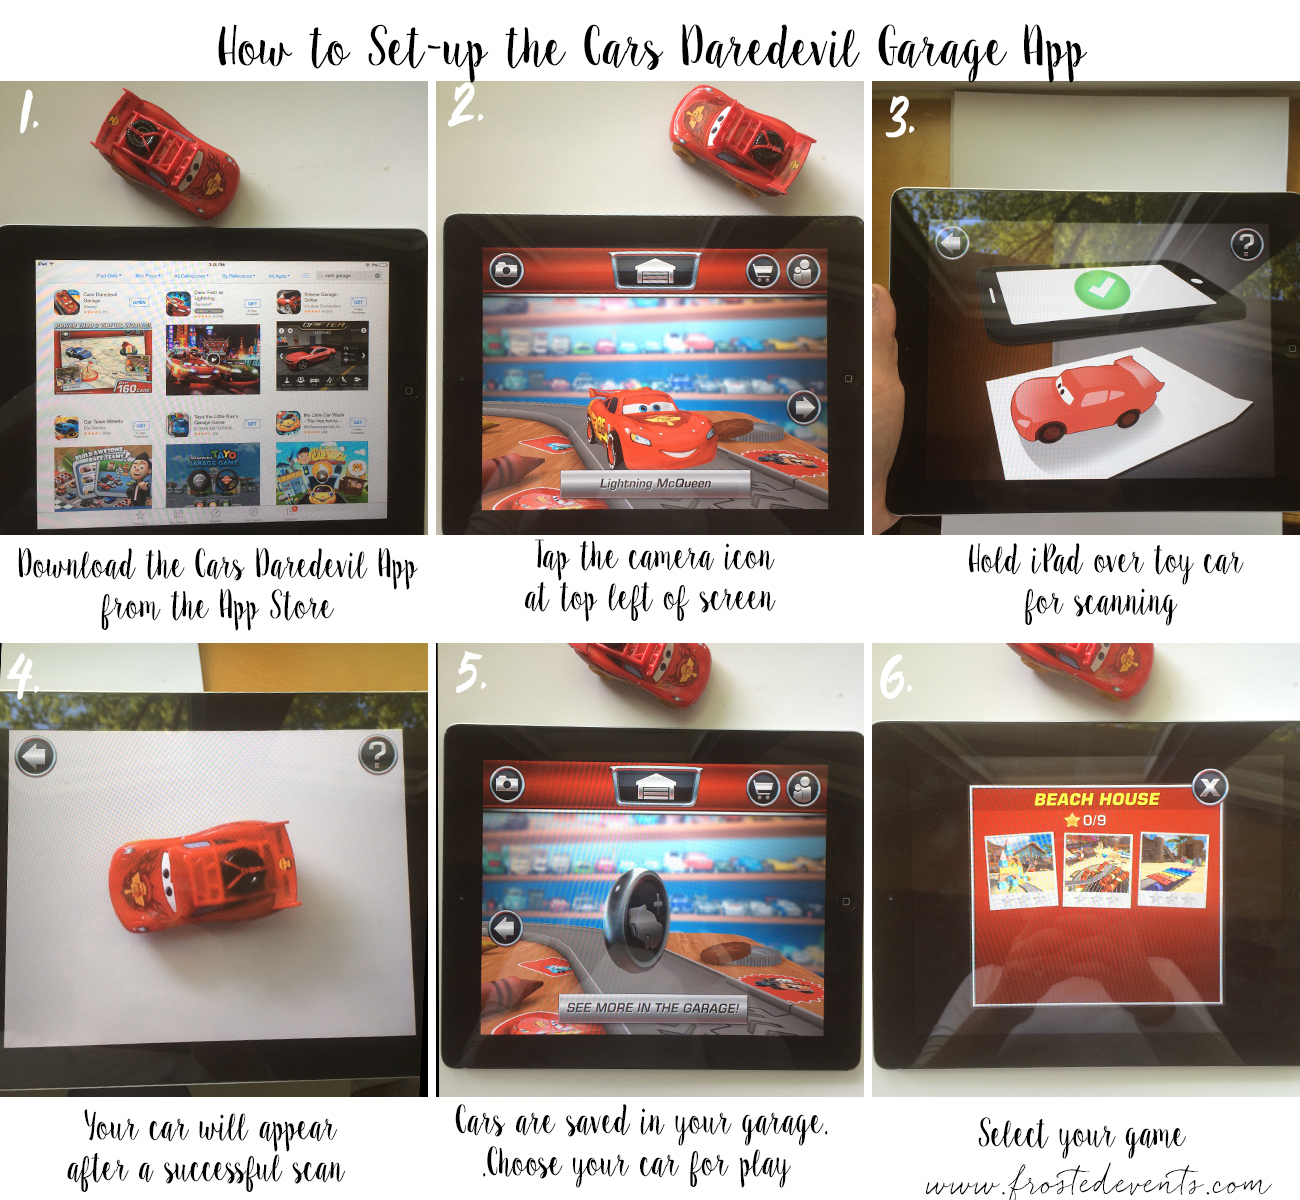 Keep Kids Entertained in the Car with Disney Daredevil Garage App -How To App Tutorial #DisneyPixarCarsToGo #collectivebias #shop